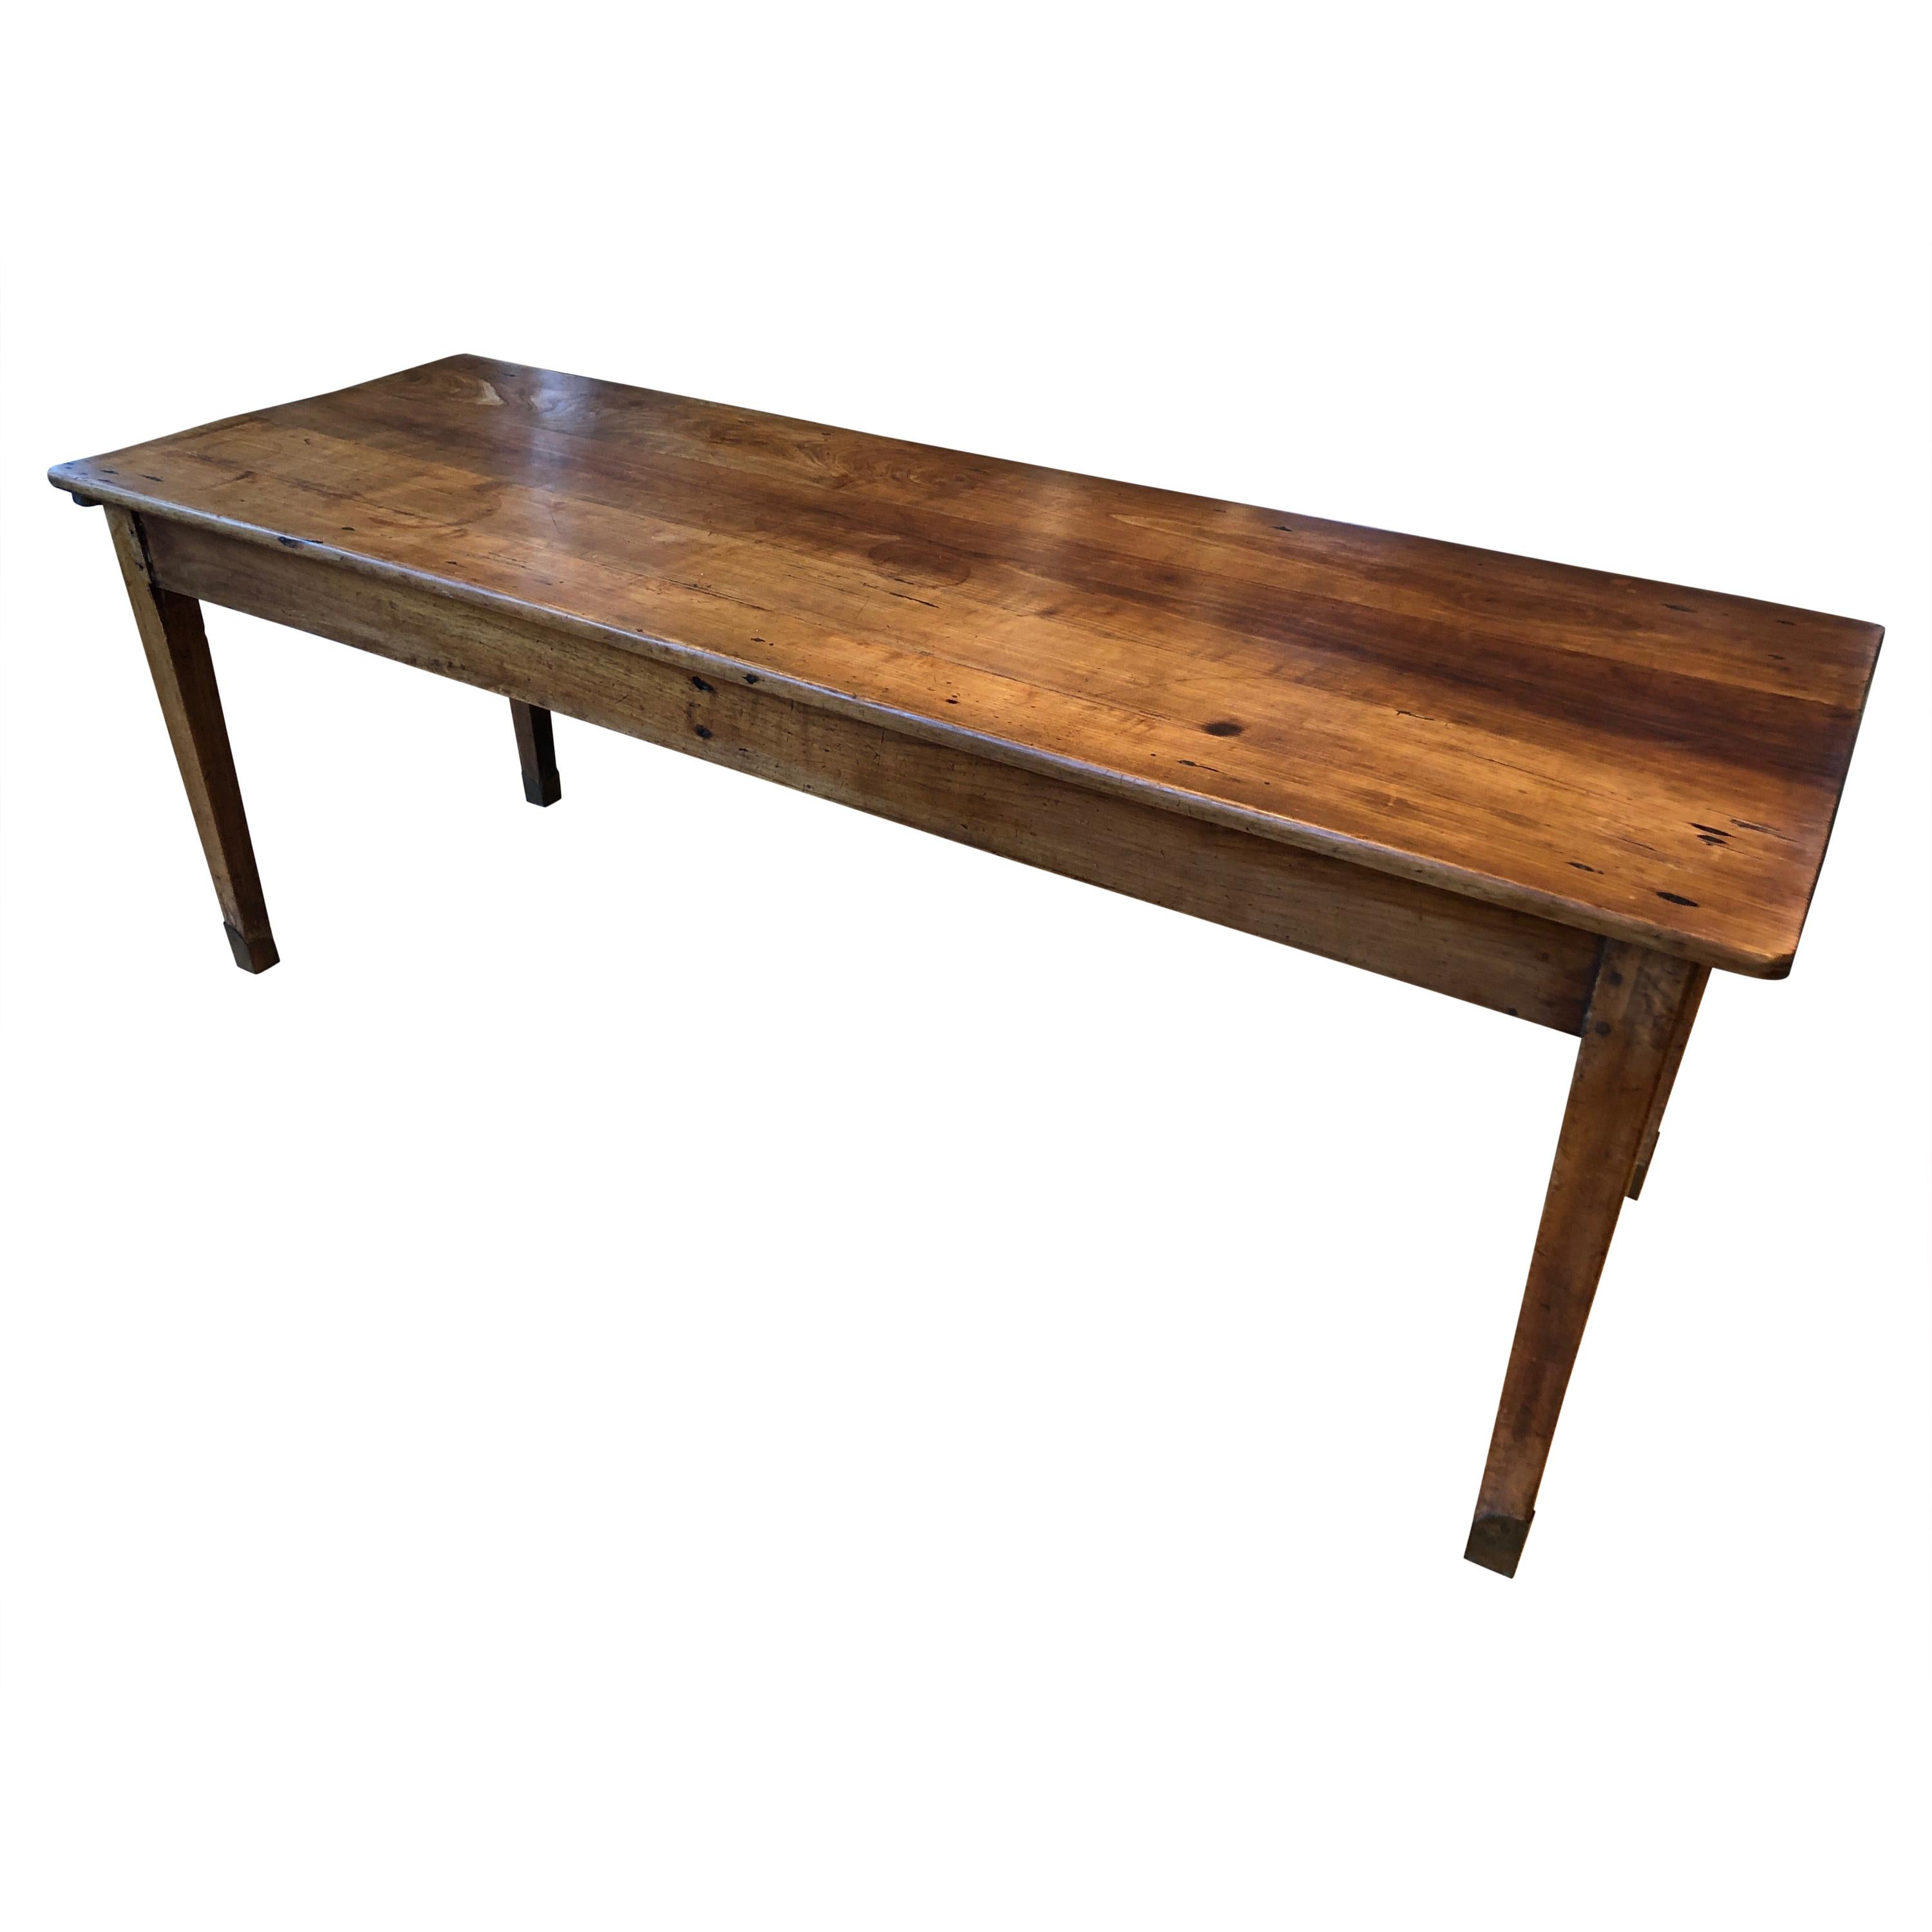 Warm and Friendly 19th Century Elegant Country Cherry Farm Table